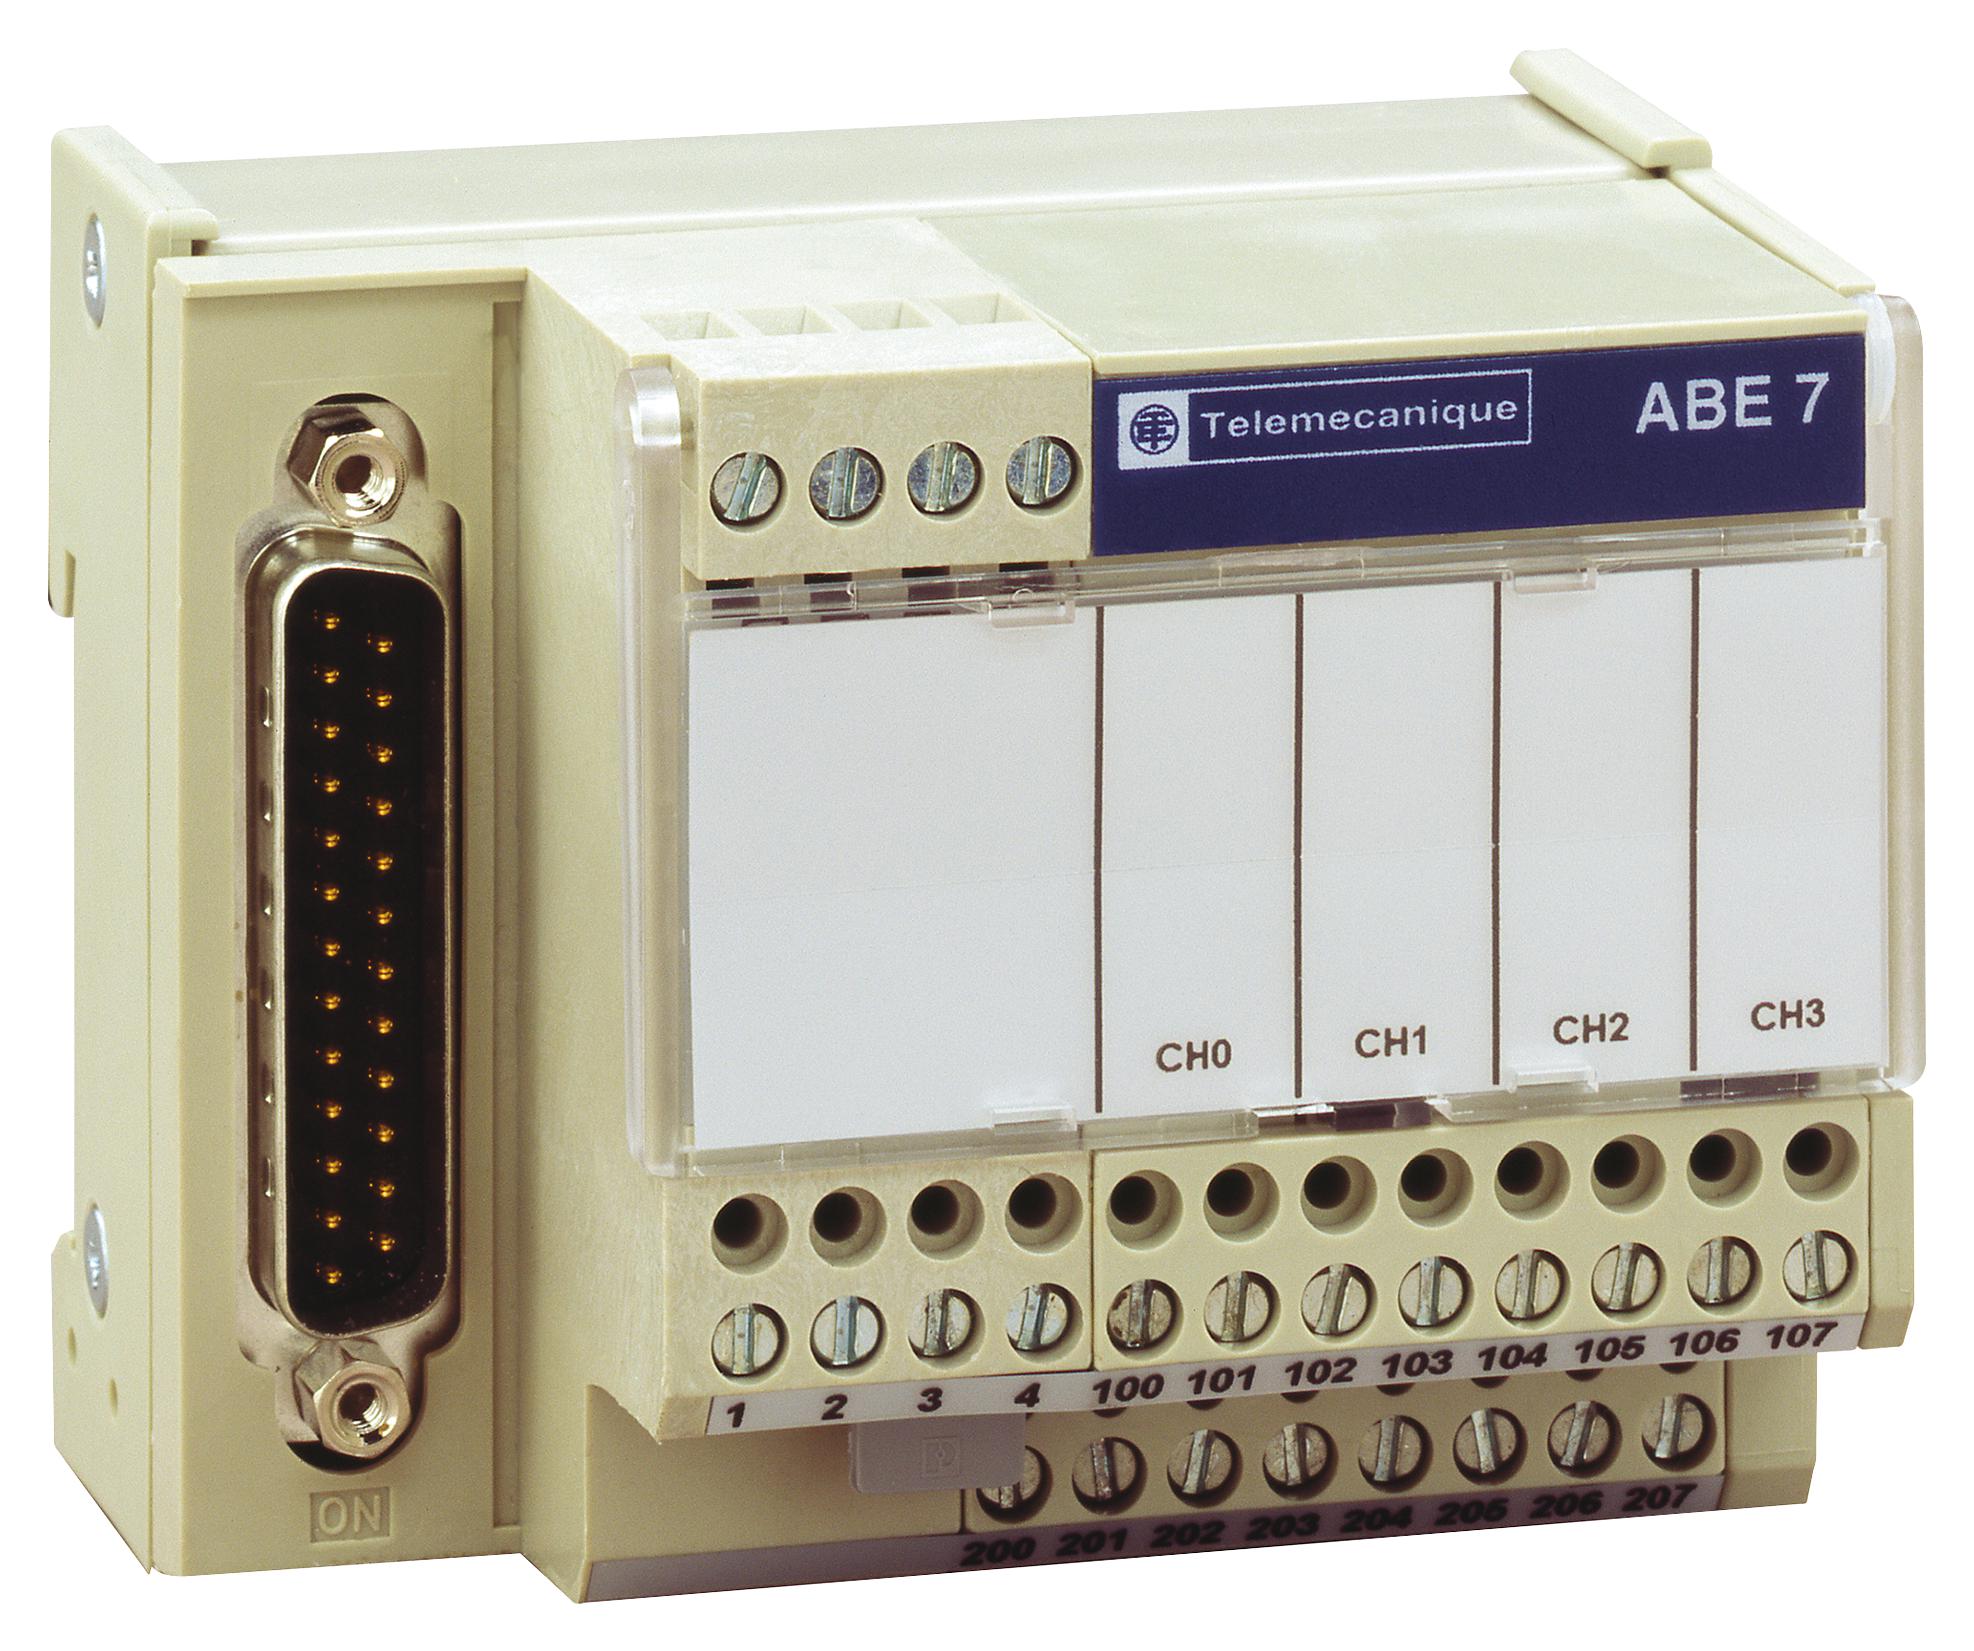 ABE7CPA412 CONNECTION SUB-BASE, 4-CH, THERMOCOUPLE SCHNEIDER ELECTRIC